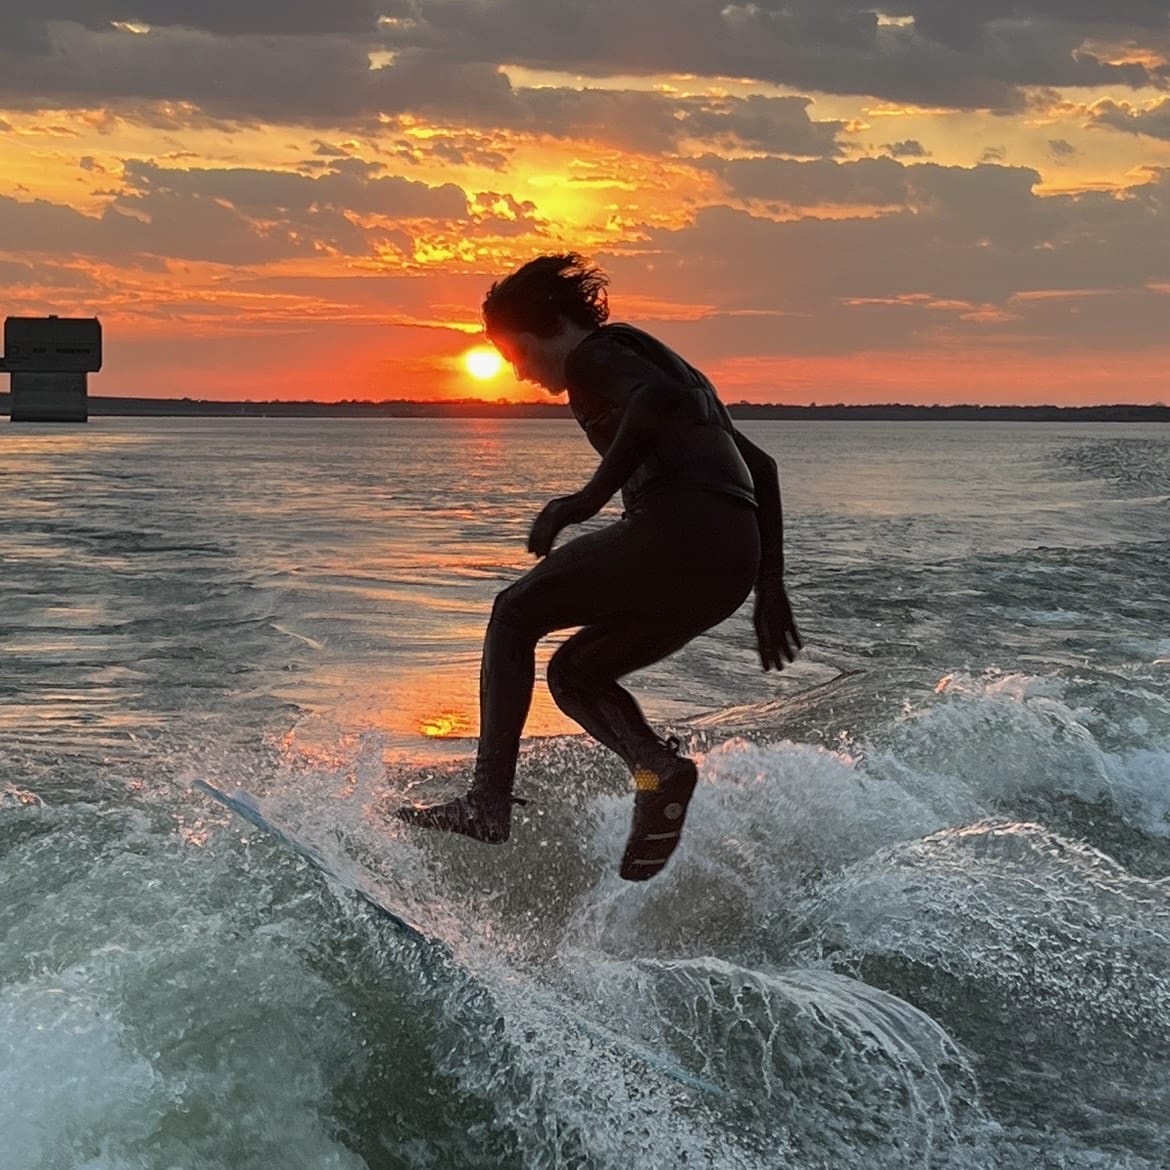 A person in a wetsuit riding a surfboard at sunset.